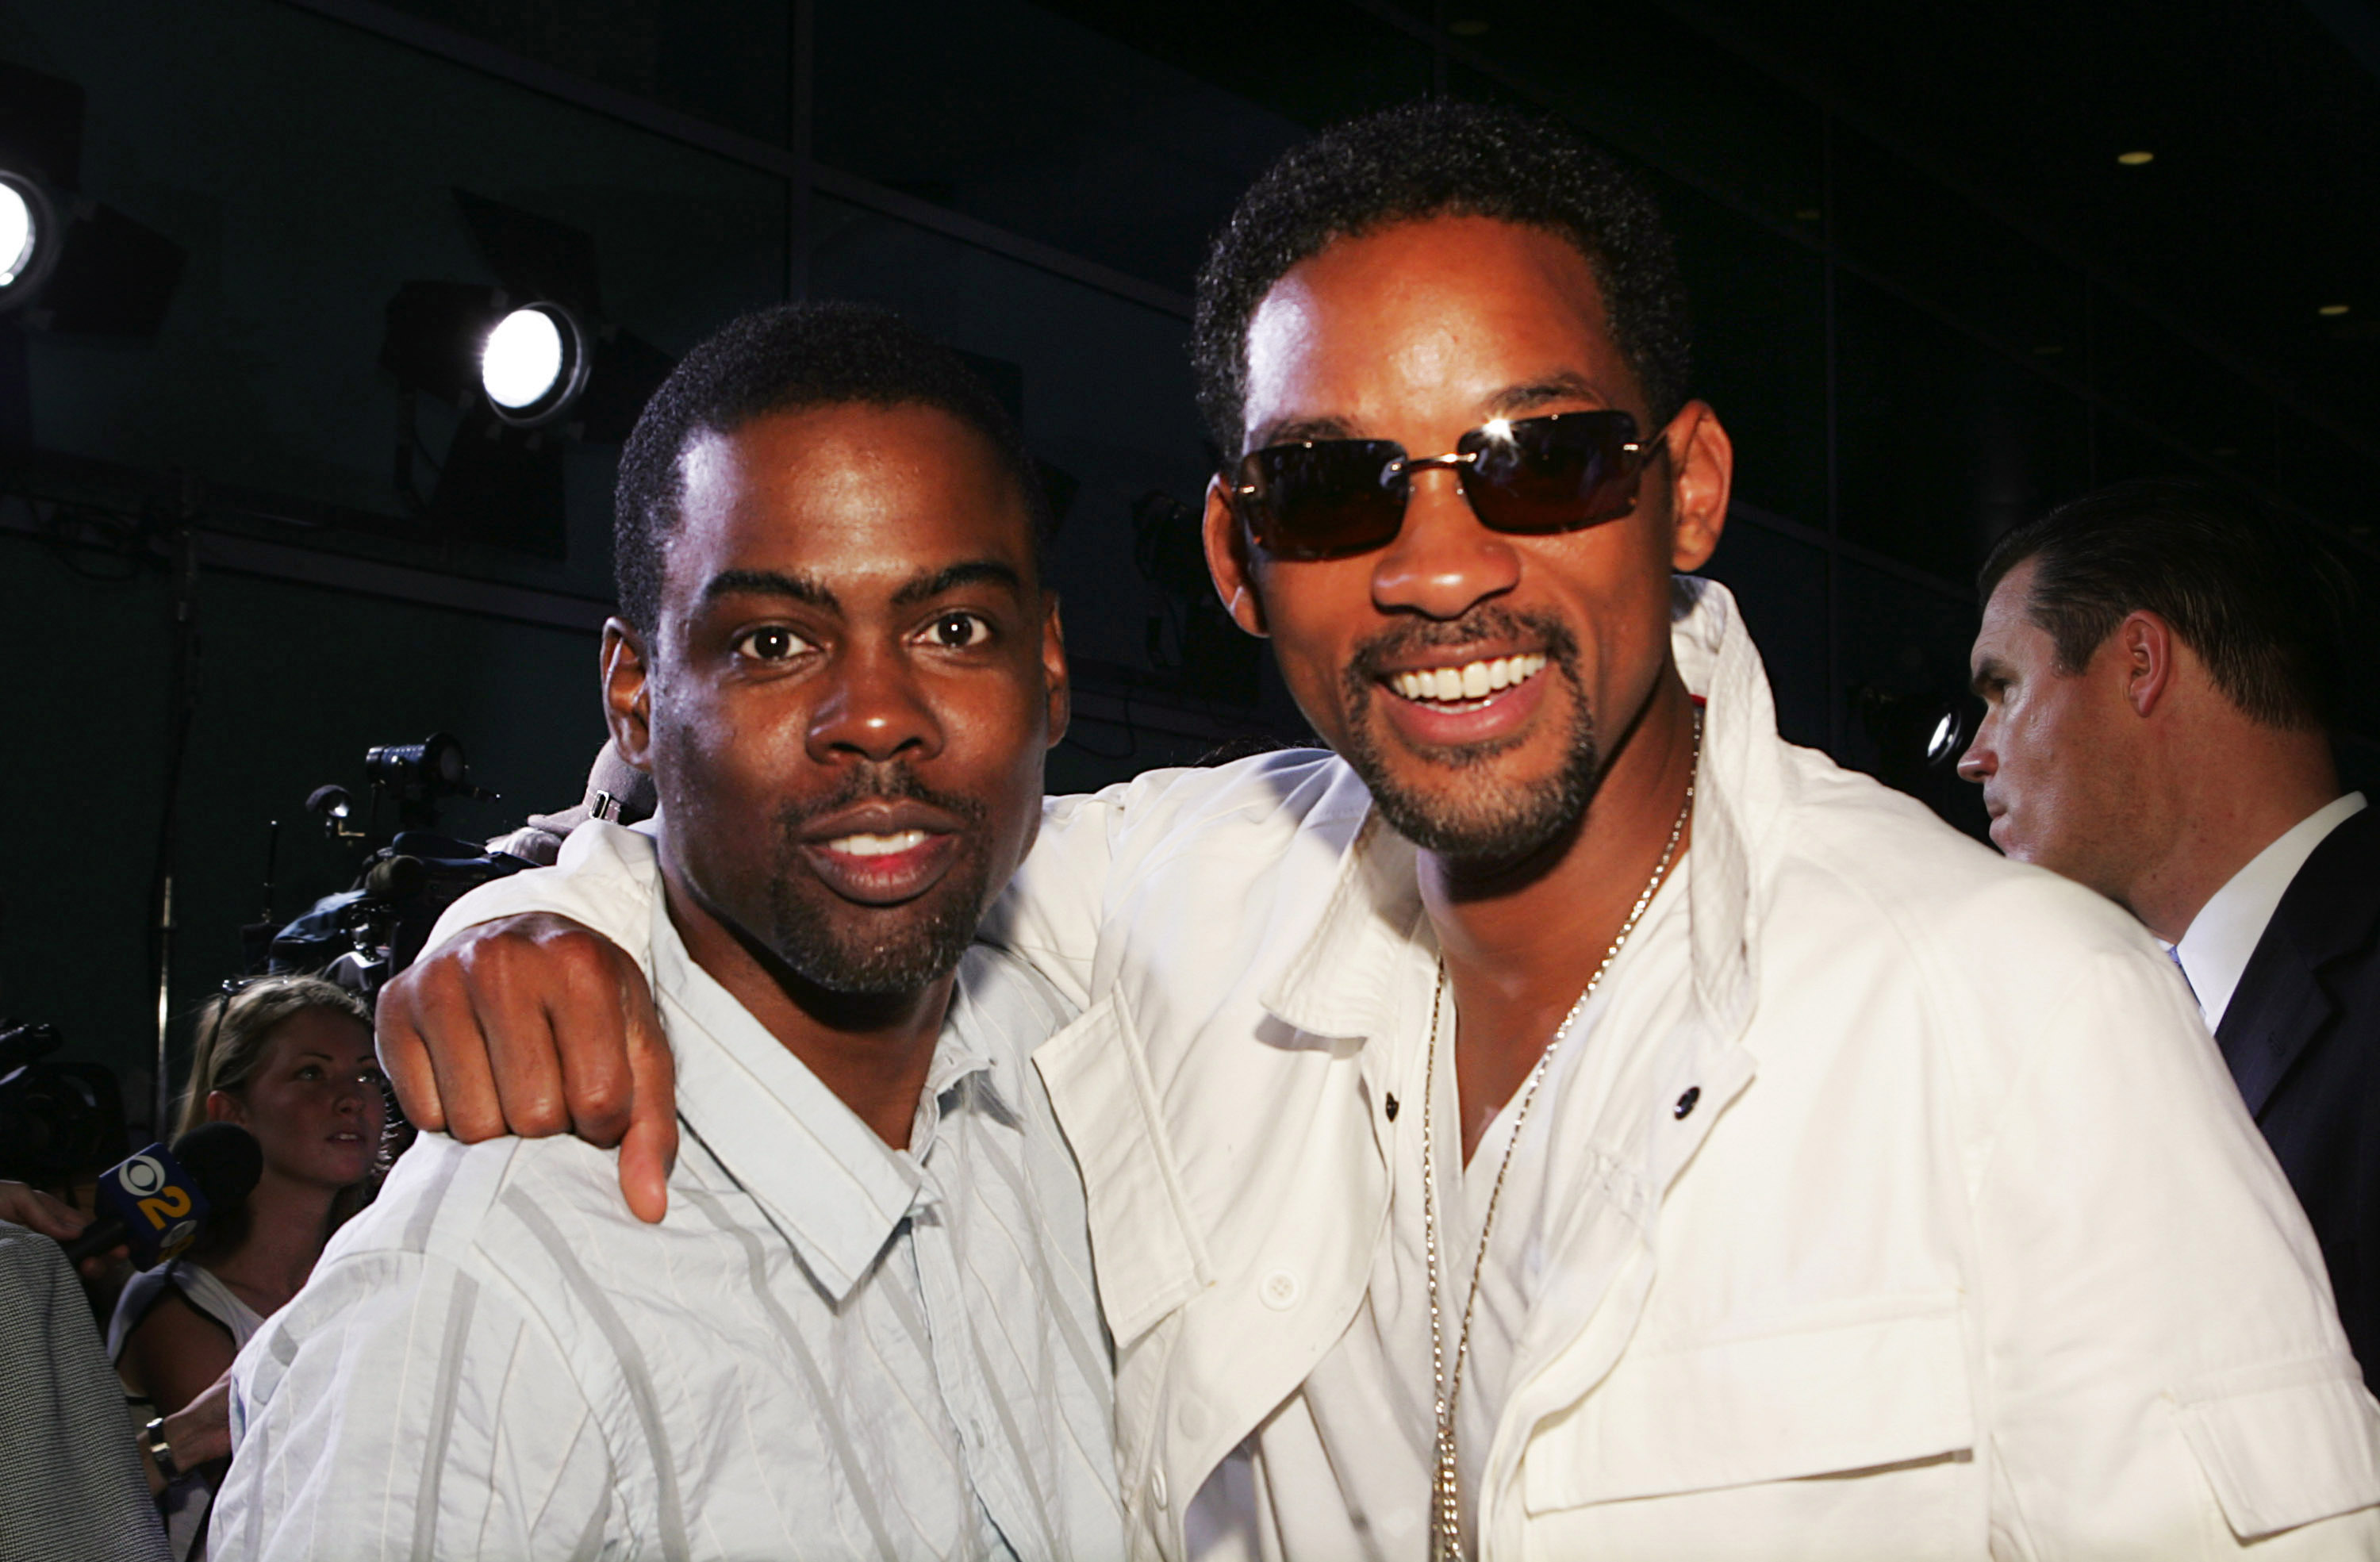 Will Smith “Unsuccessfully” Tried To Make Amends With Chris Rock: Report